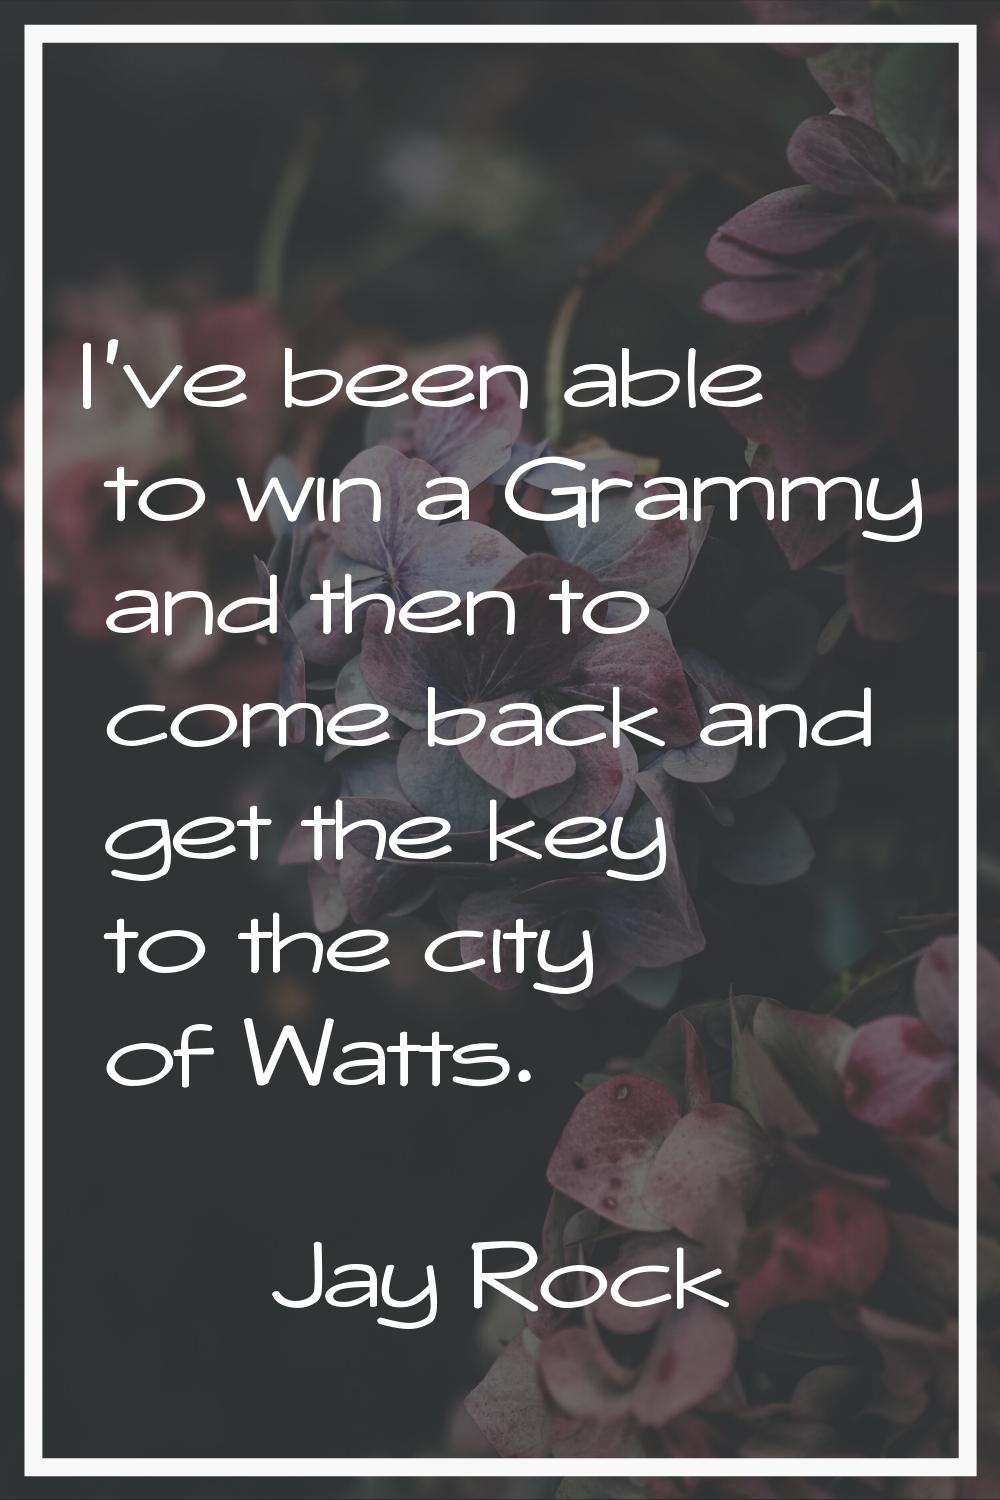 I've been able to win a Grammy and then to come back and get the key to the city of Watts.